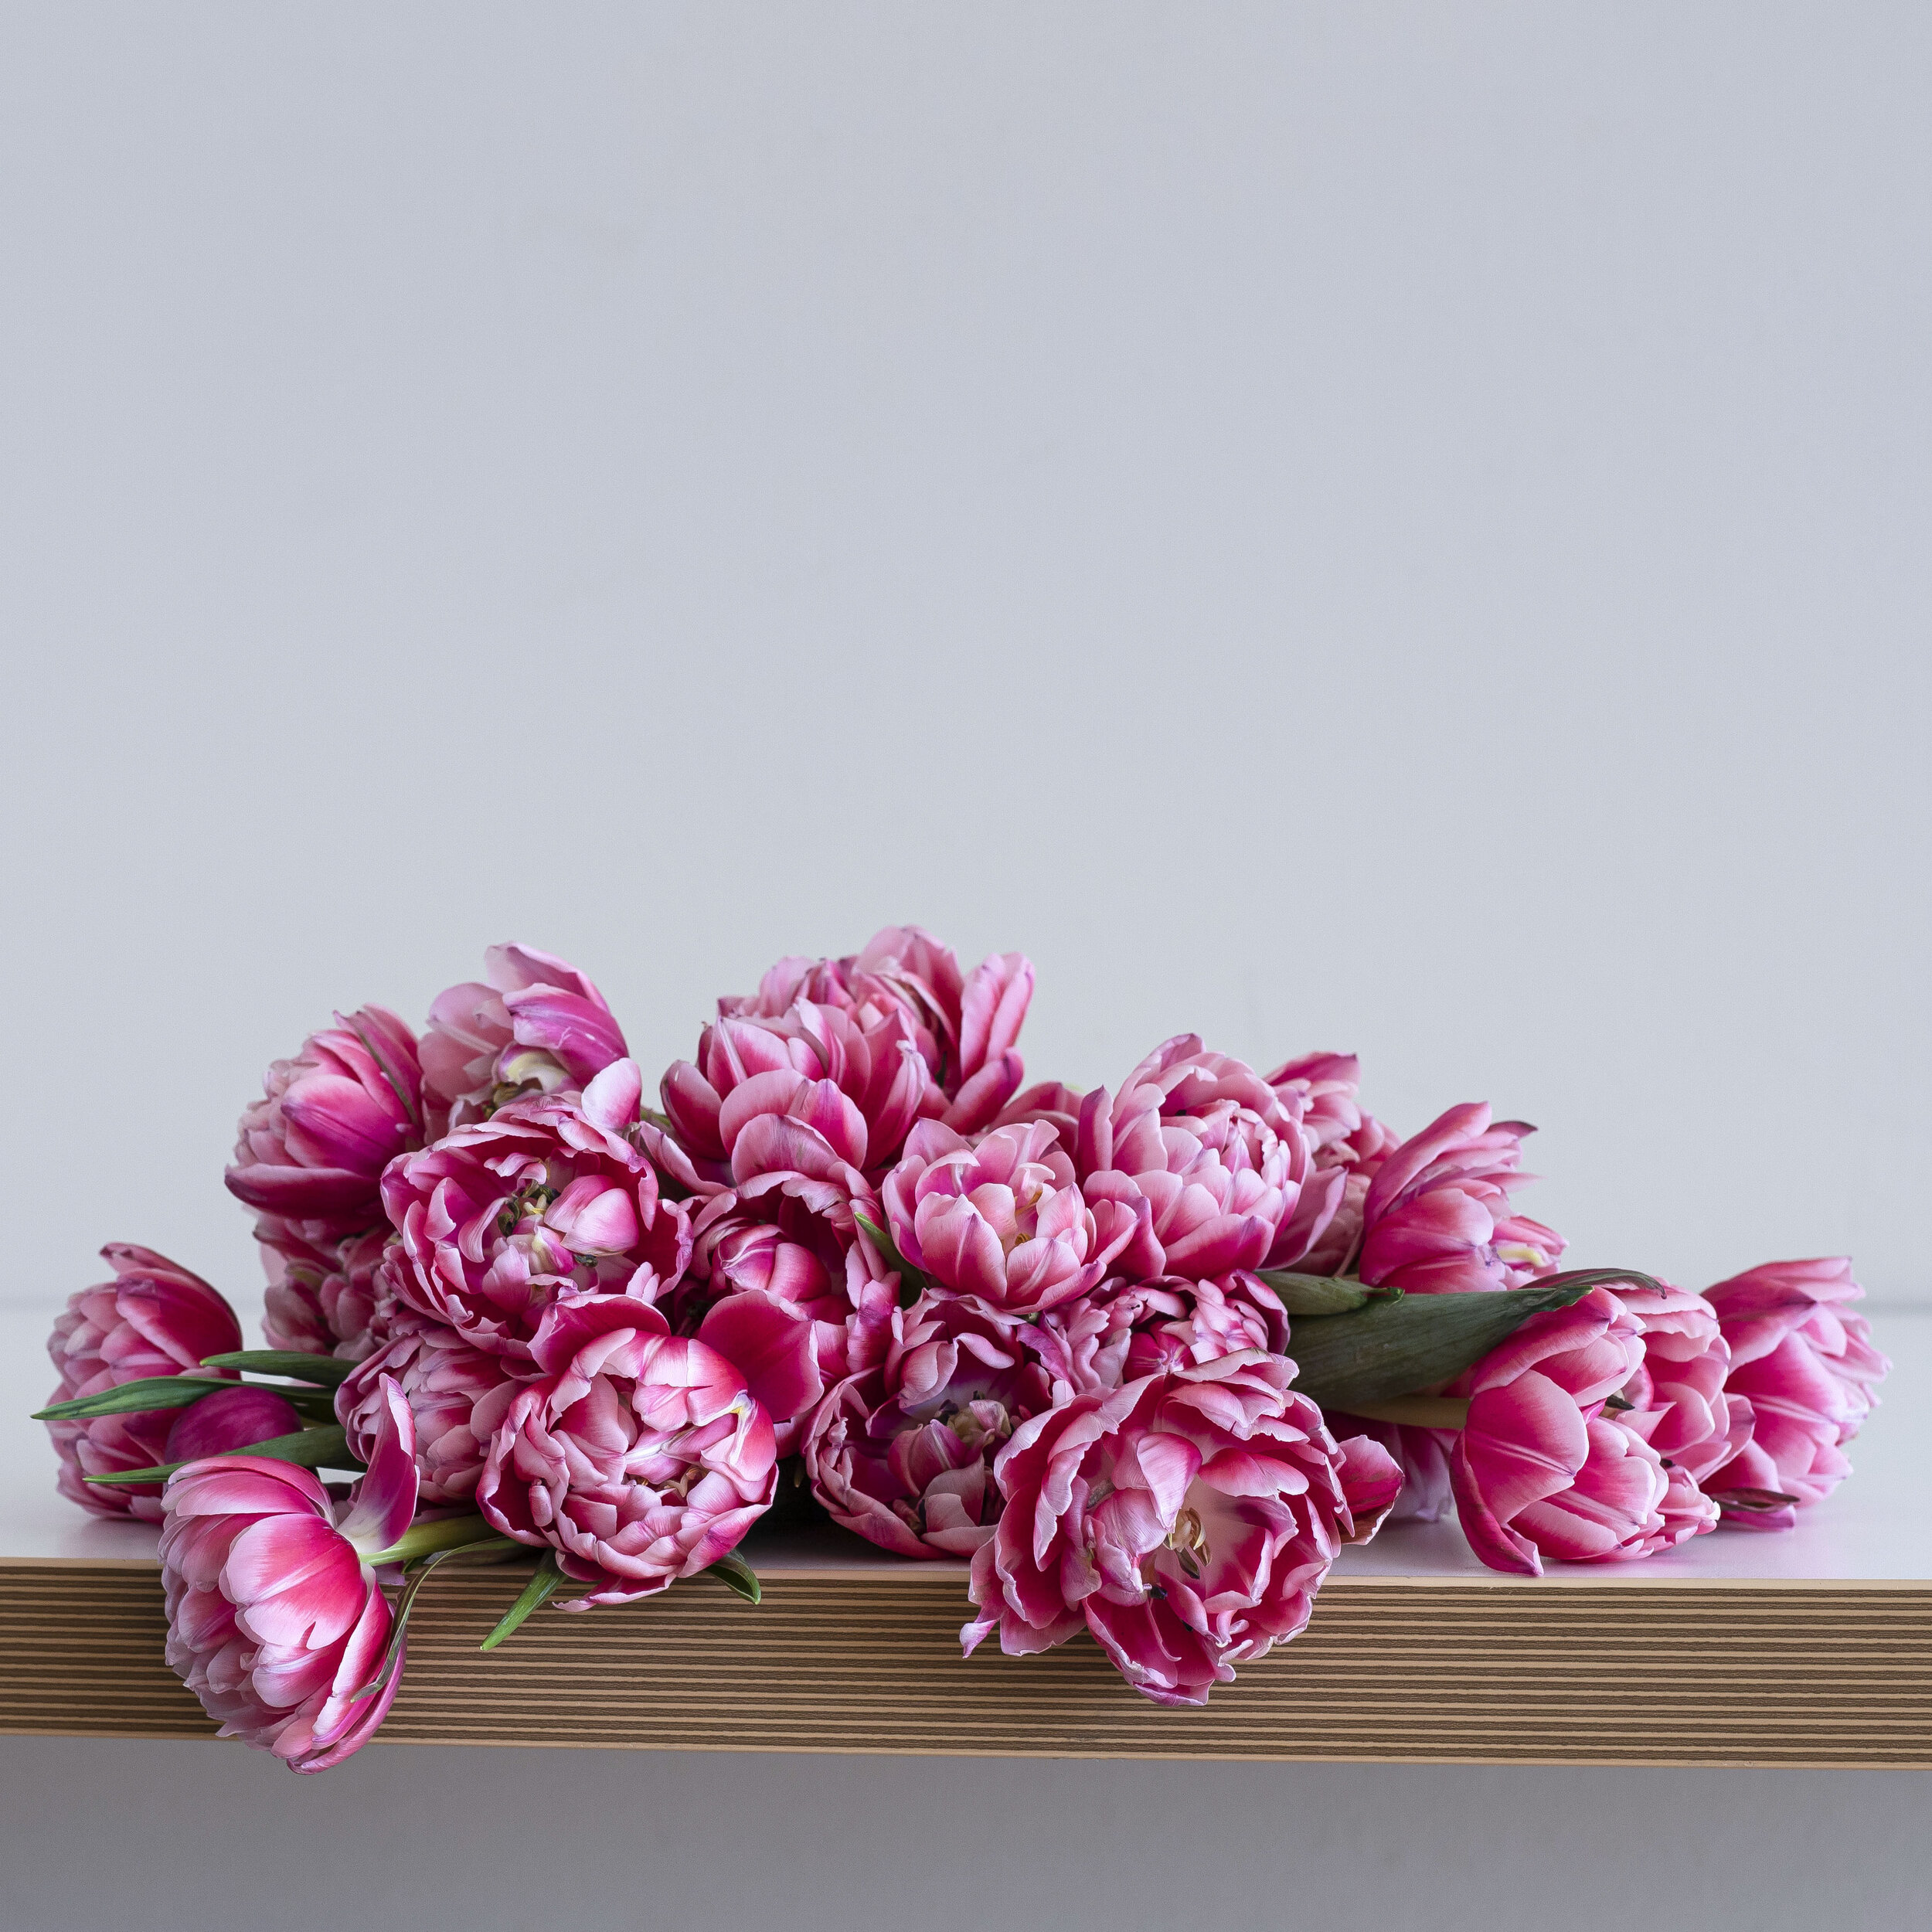 Dark pink tulips blooming on a white table top